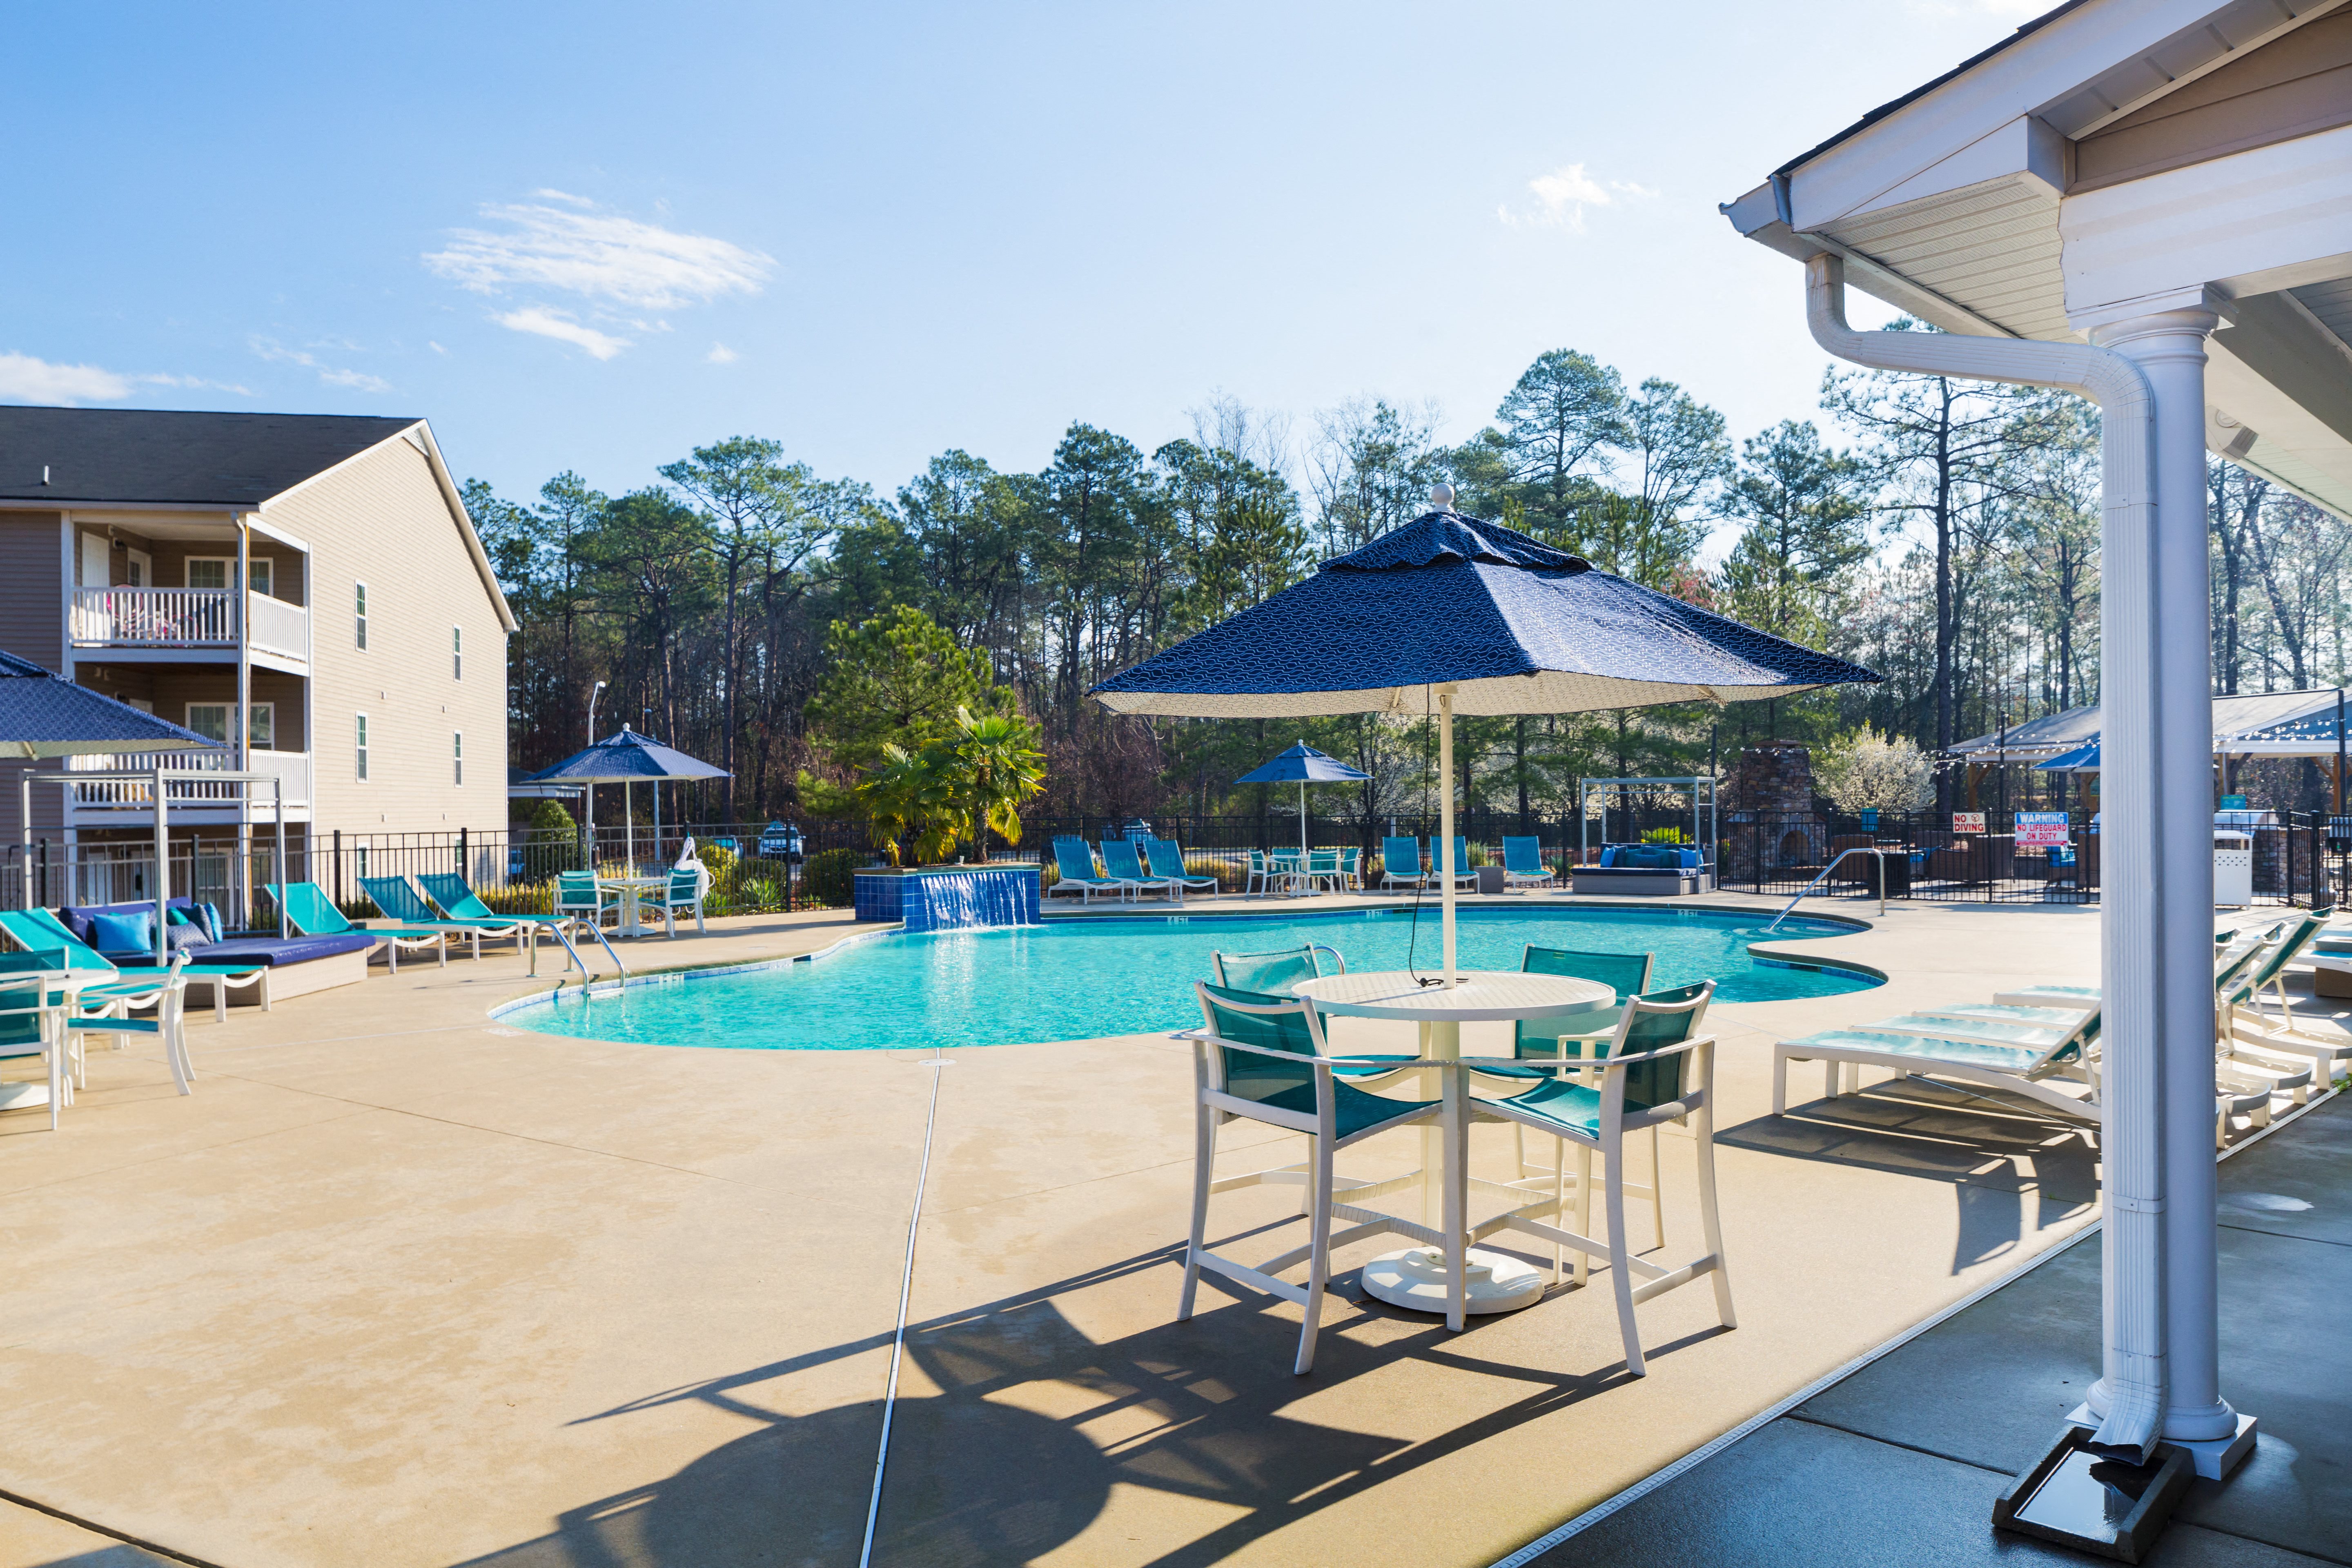 Photos and Video of Waterford Apartments in Spring Lake, NC